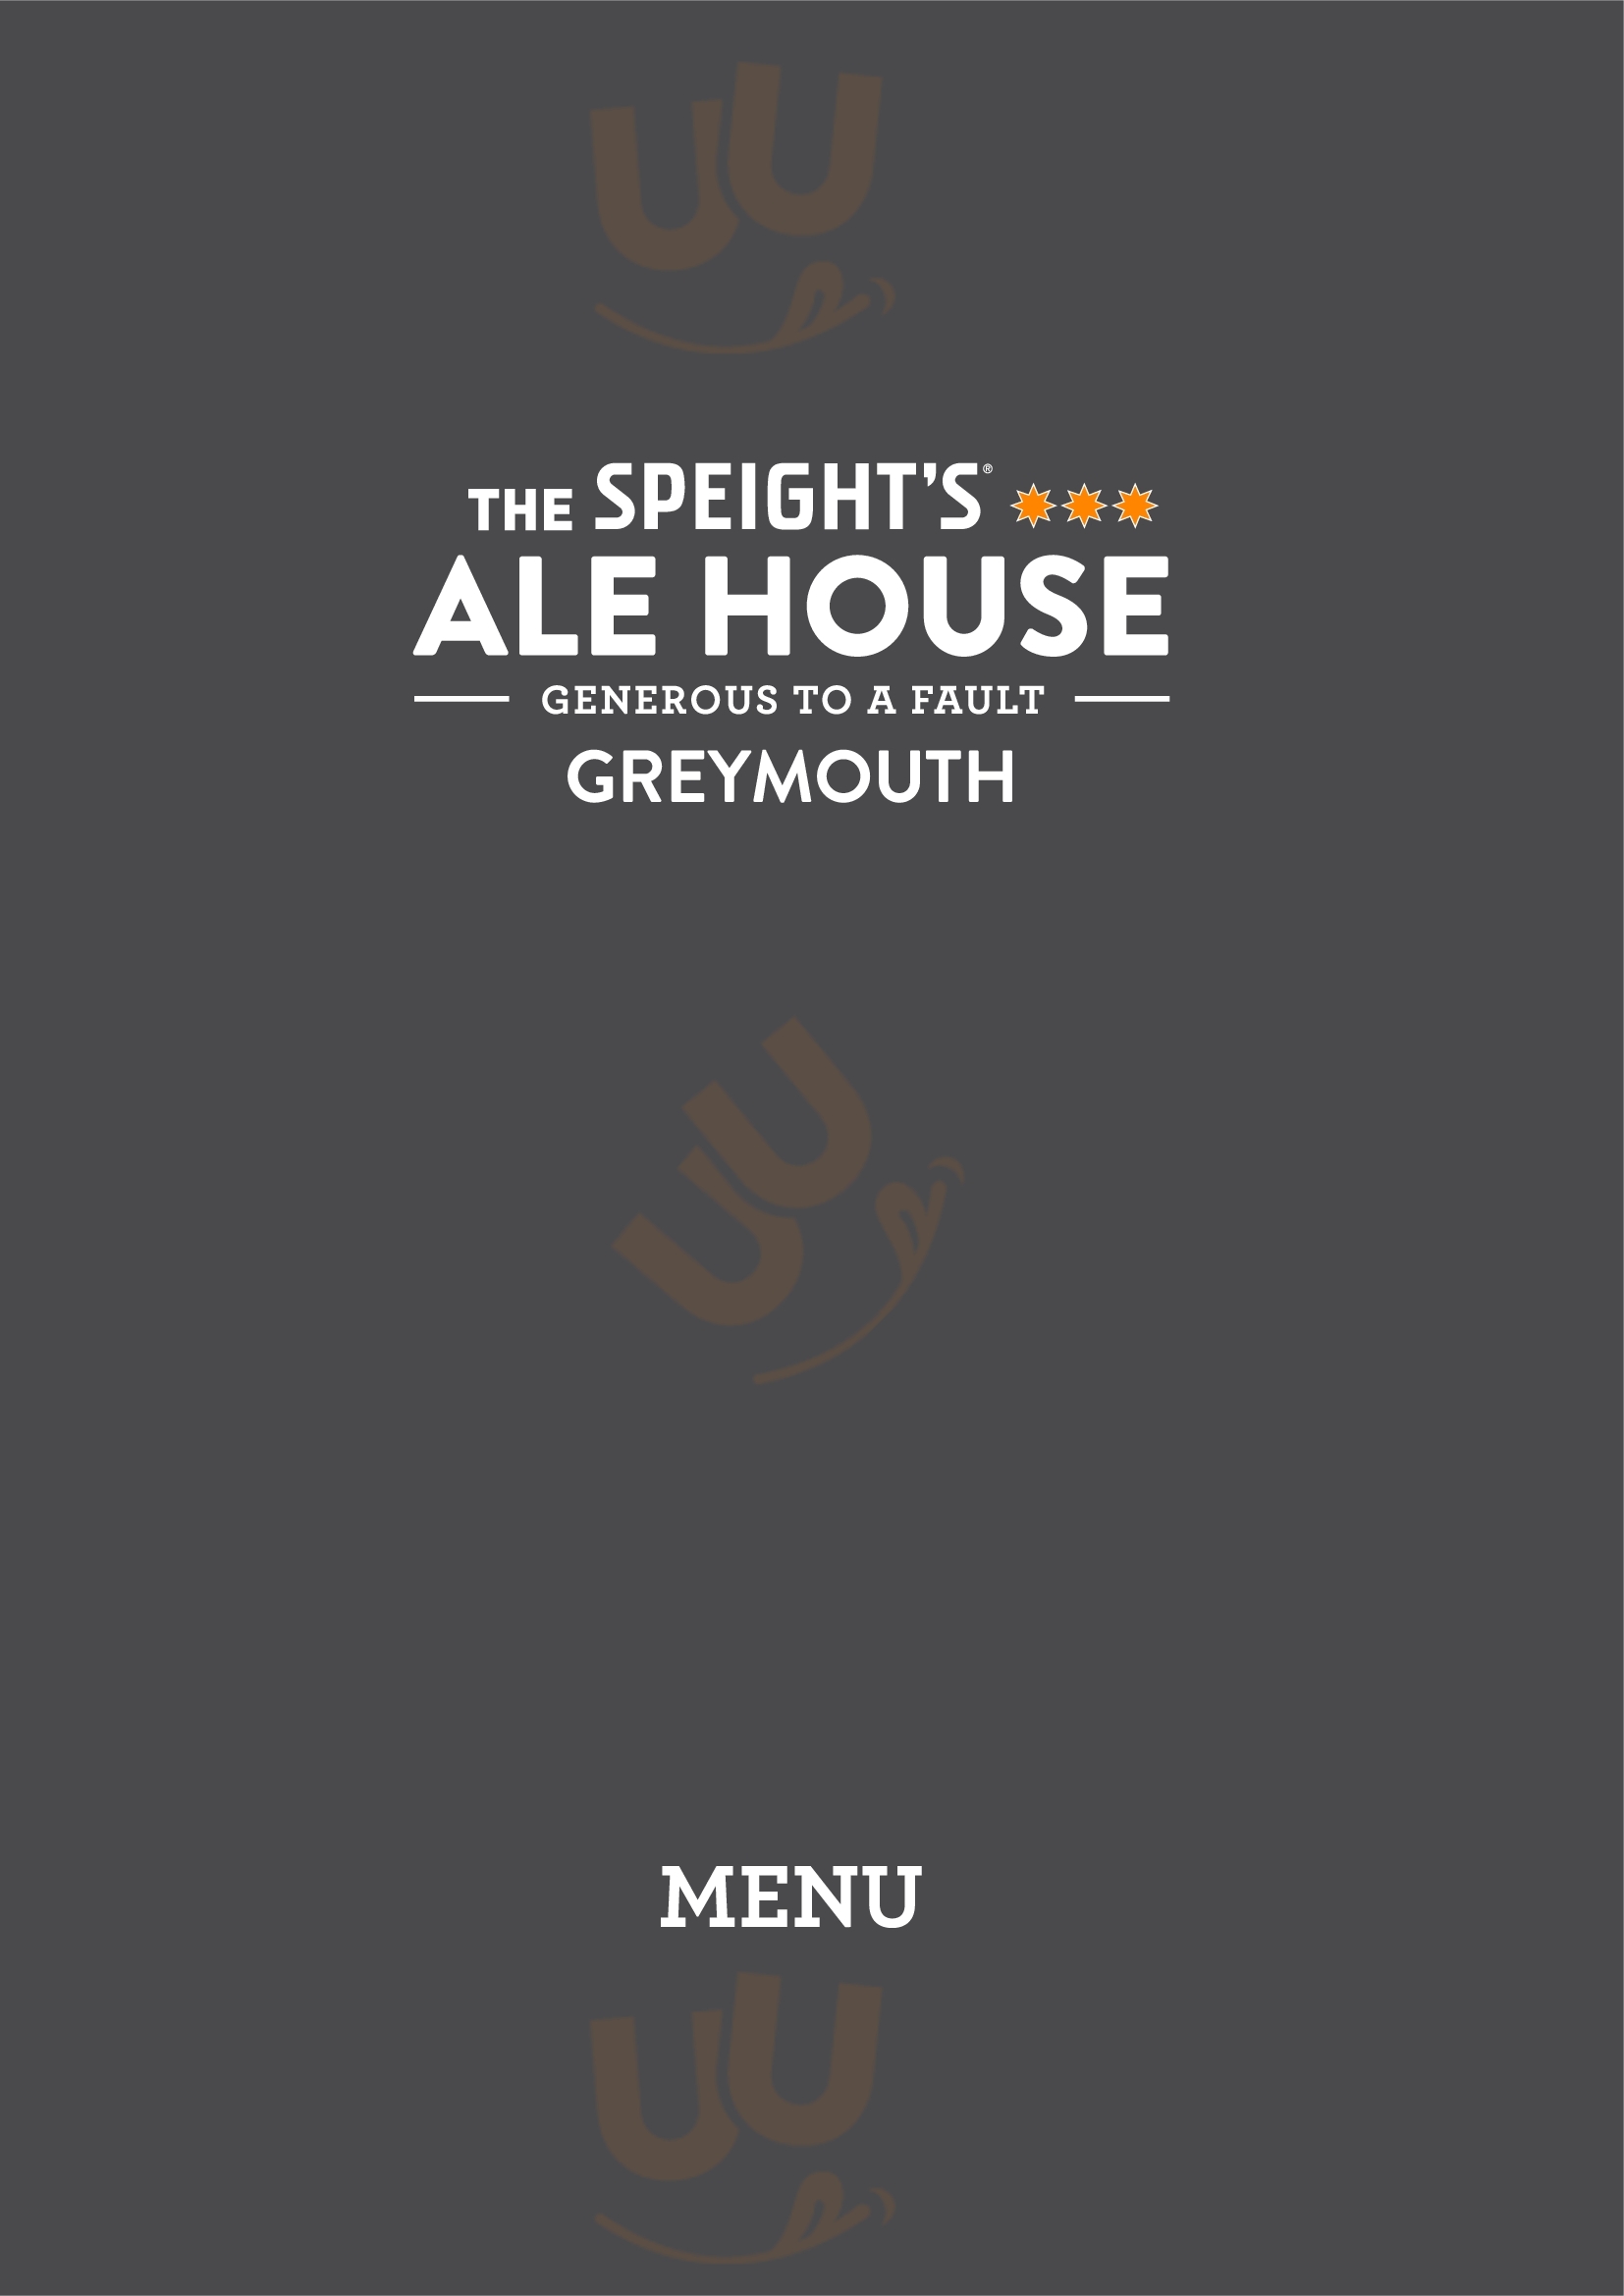 The Speight's Ale House Greymouth Menu - 1